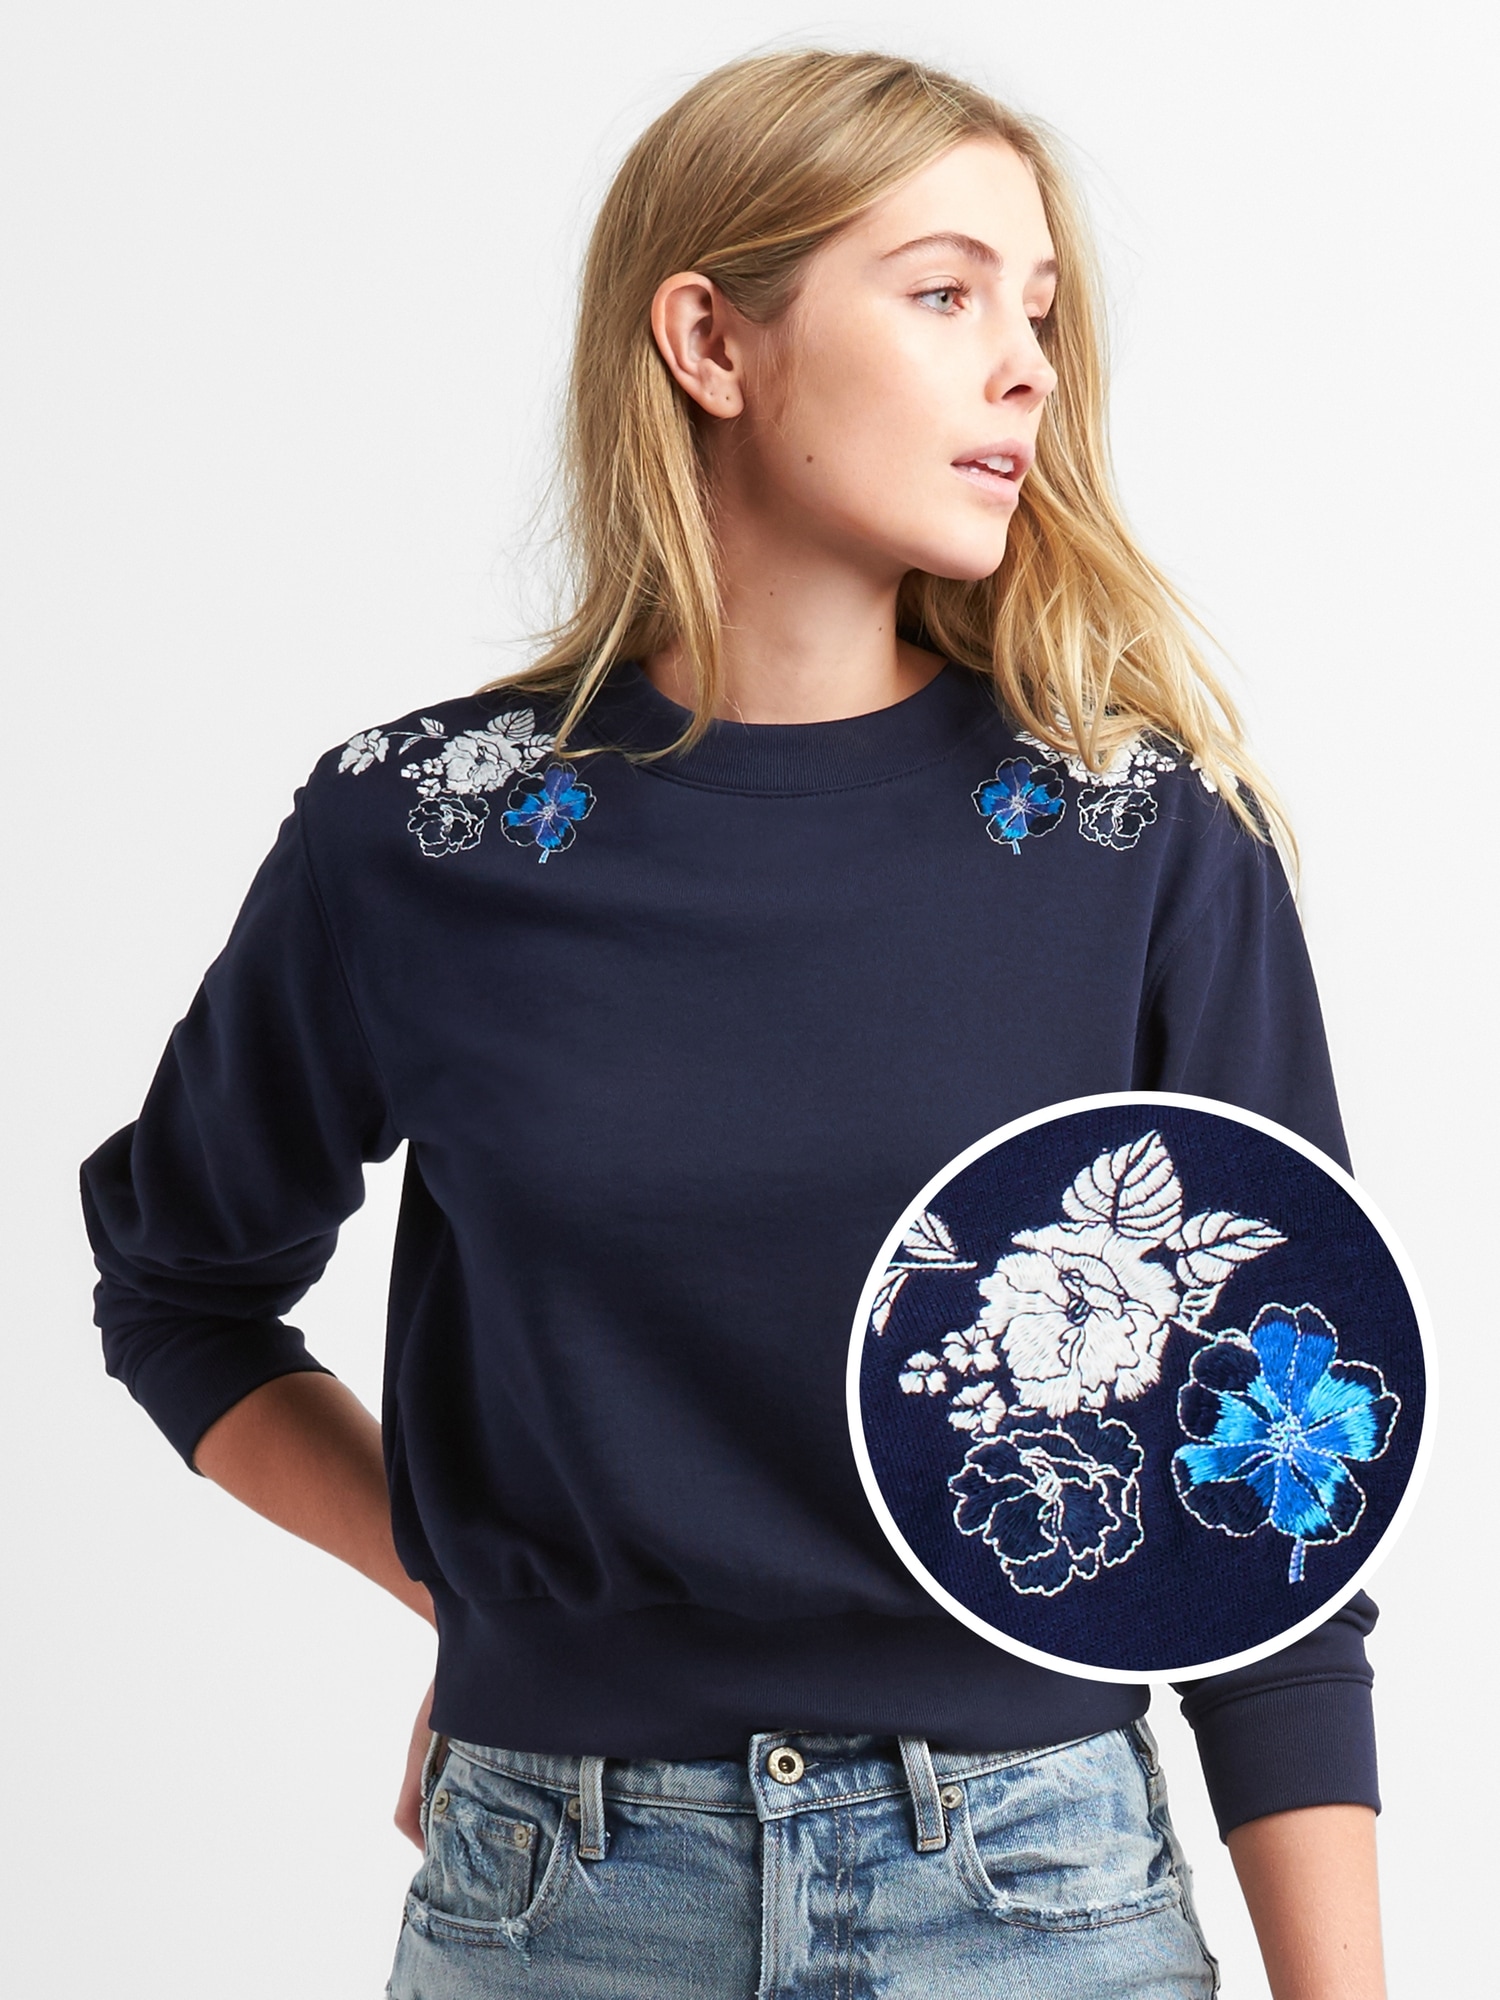 Floral Embroidery Detail Crew Neck Sweater